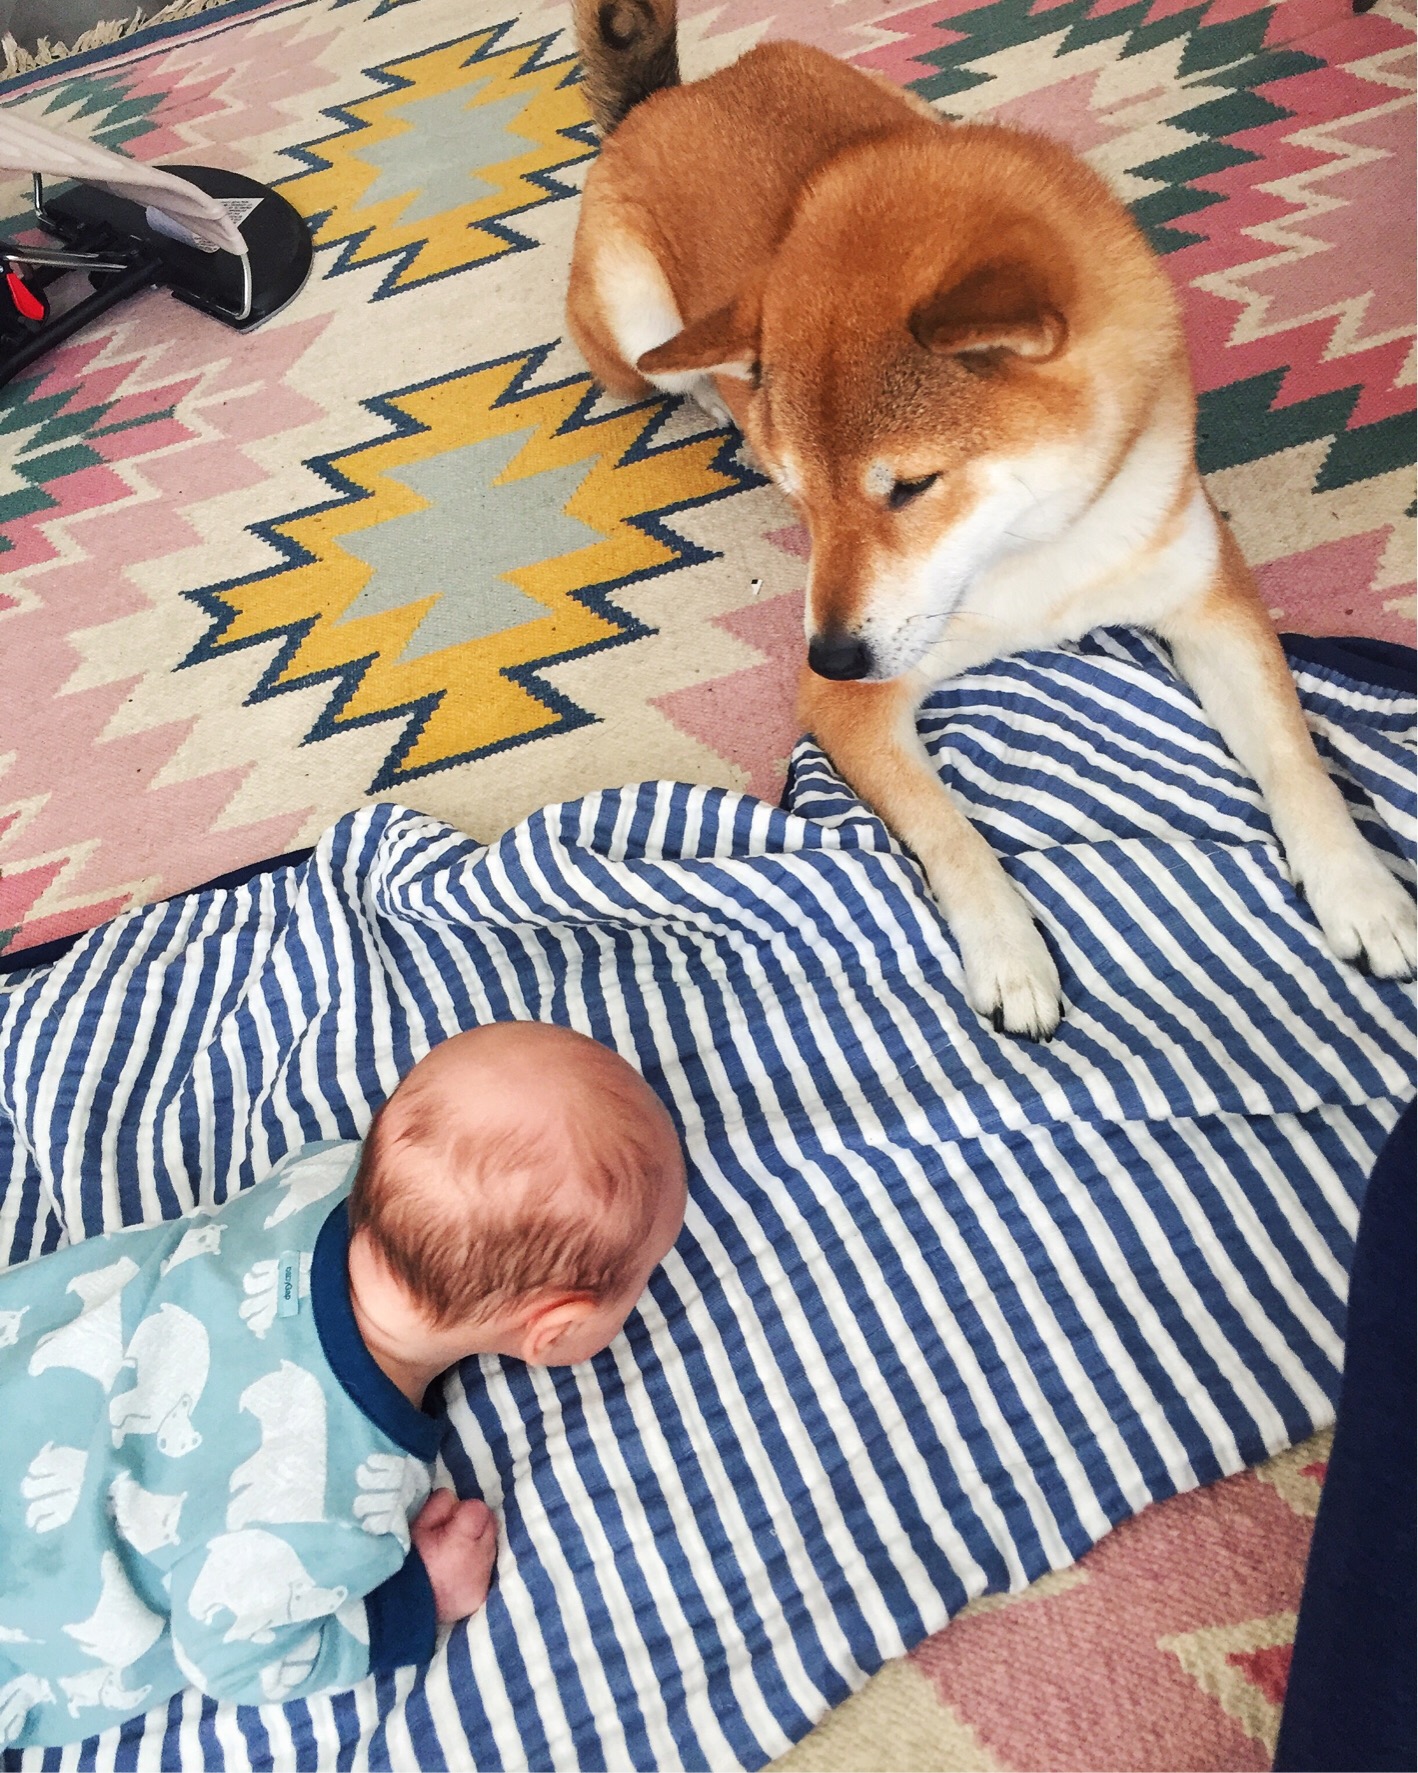 How To Introduce Dog To Baby The Fox She Modern